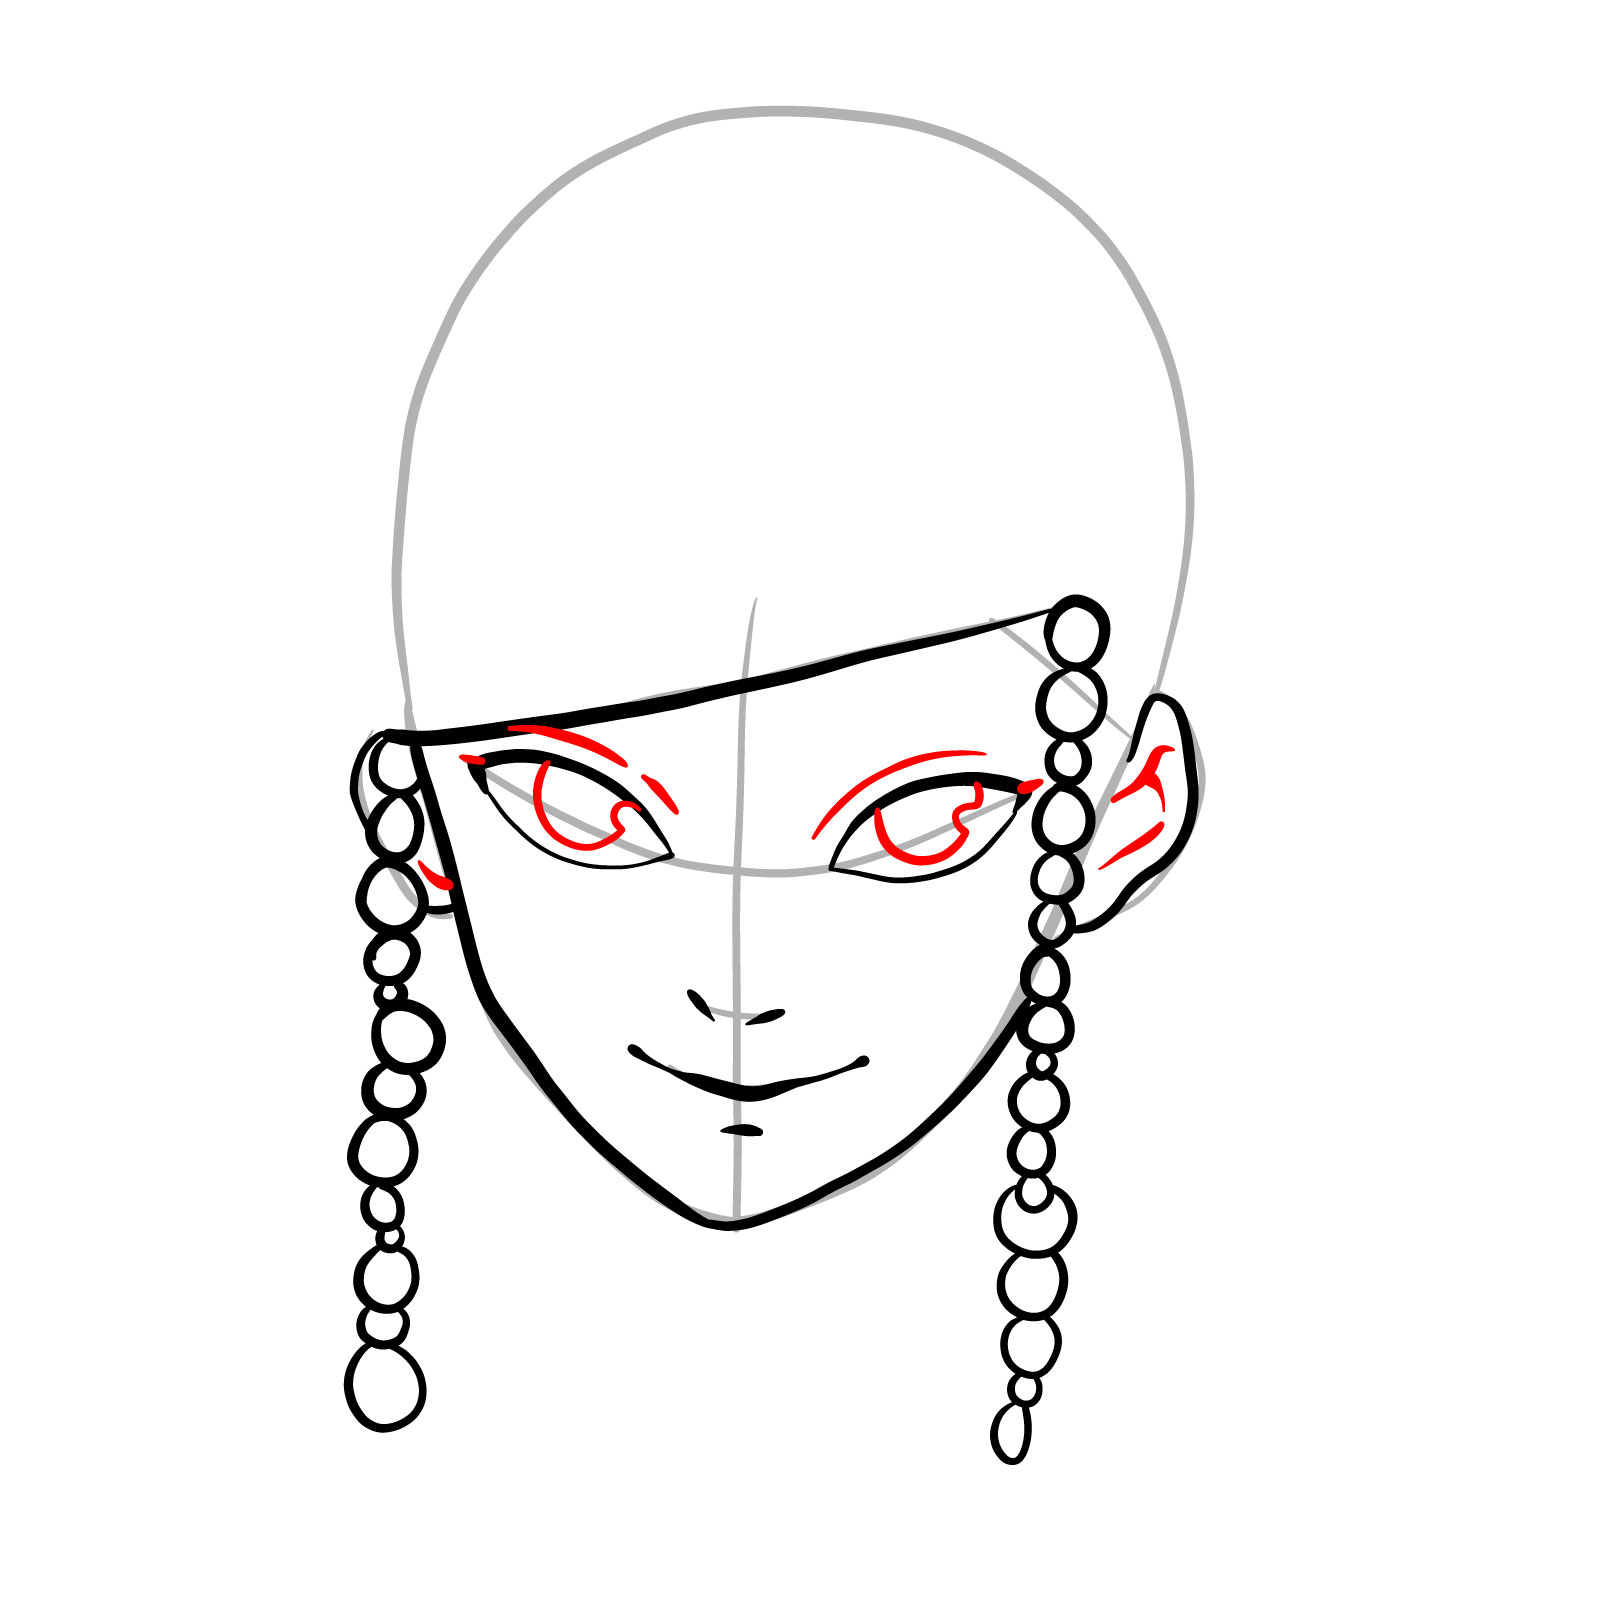 How to draw Lord Tengen's face - step 11